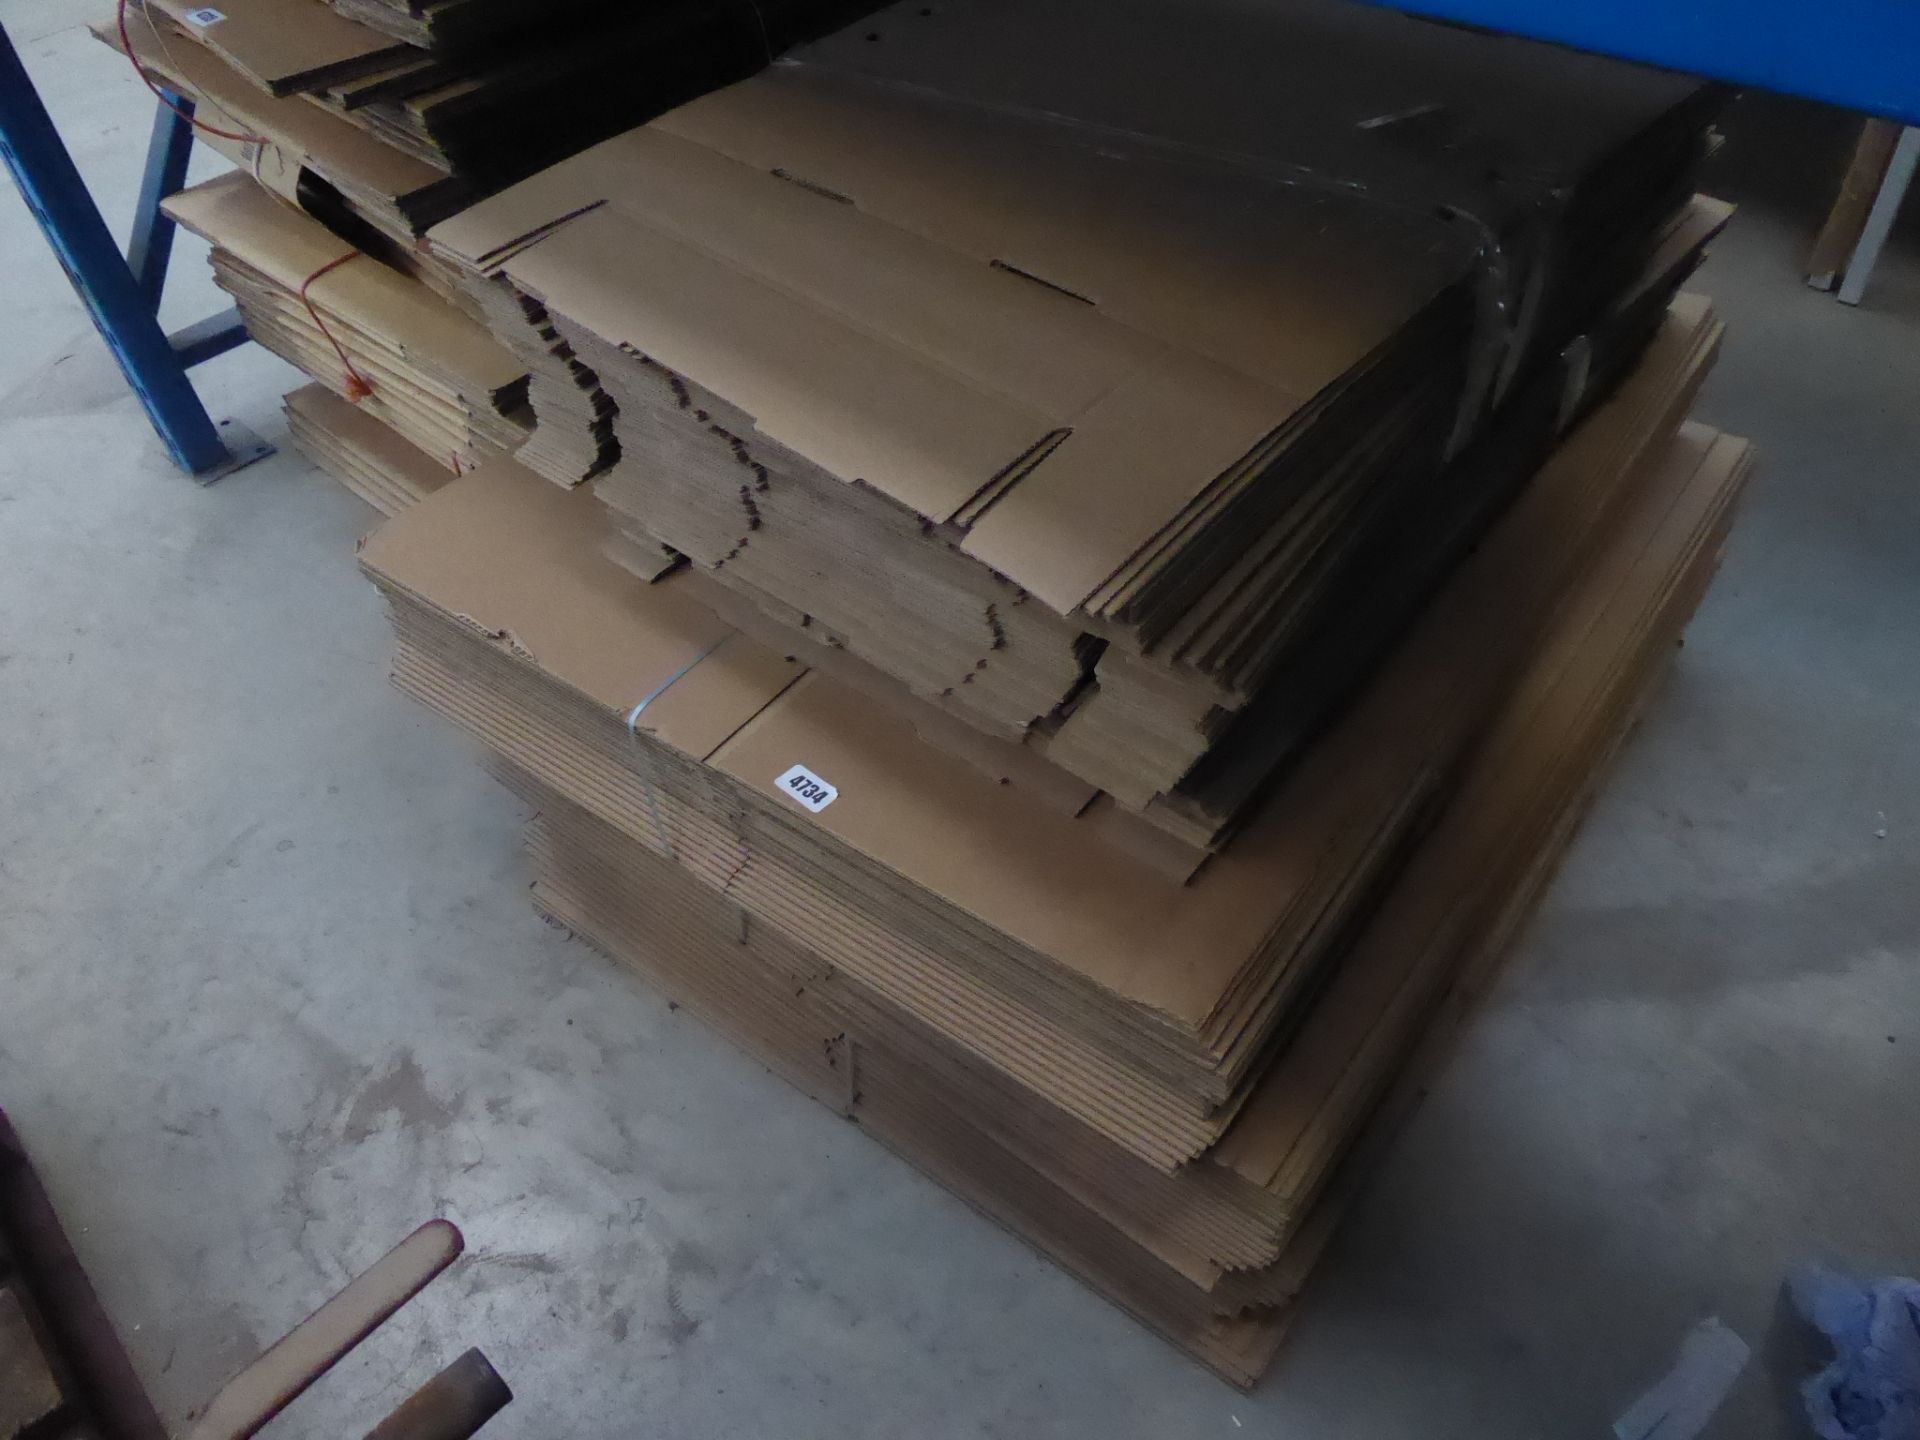 2 stacks of cardboard boxes